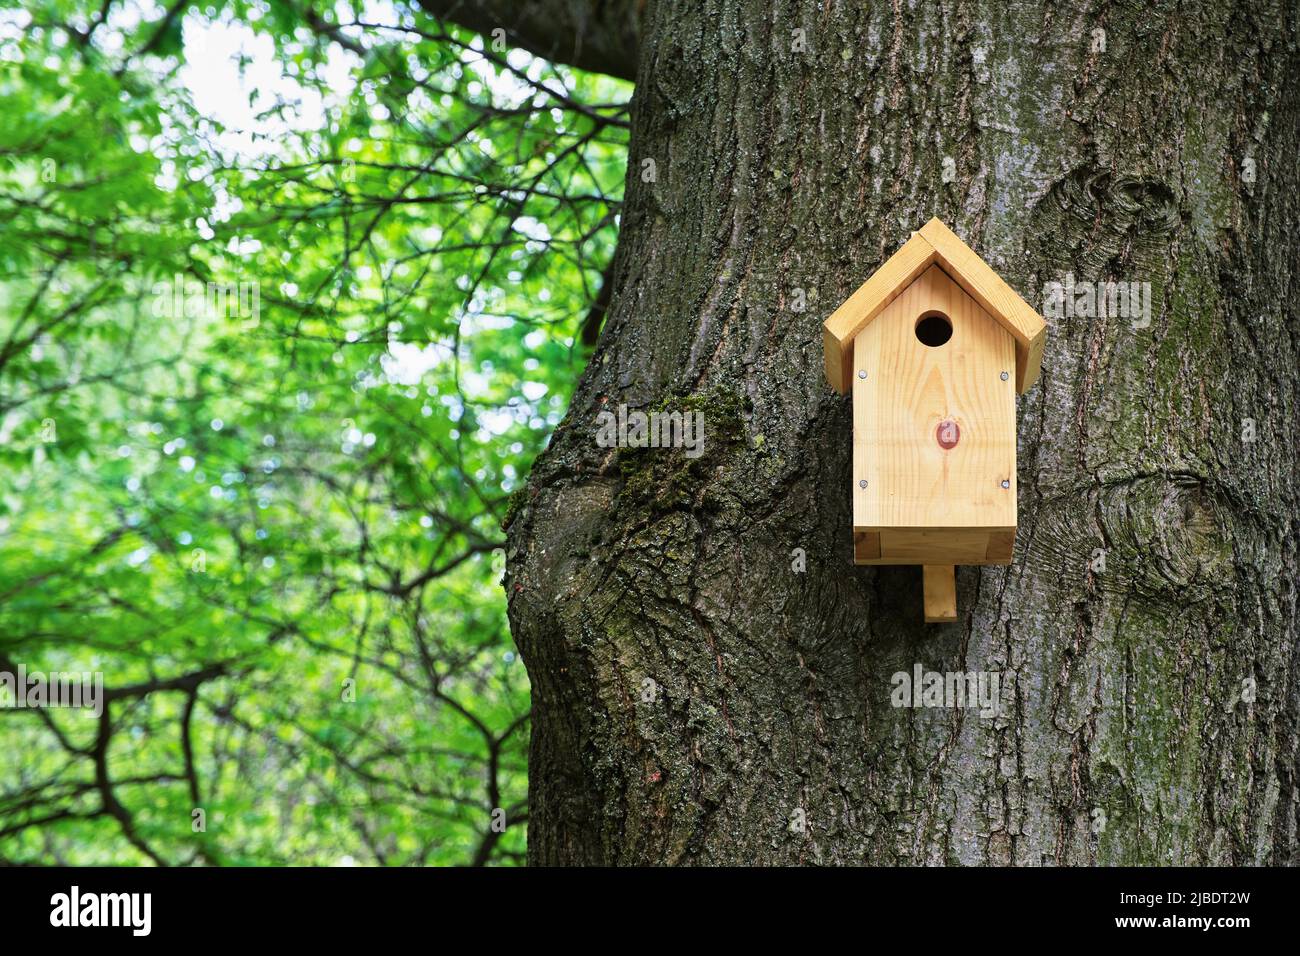 Bird house on a tree. Wooden birdhouse, nesting box for songbirds in park. Stock Photo